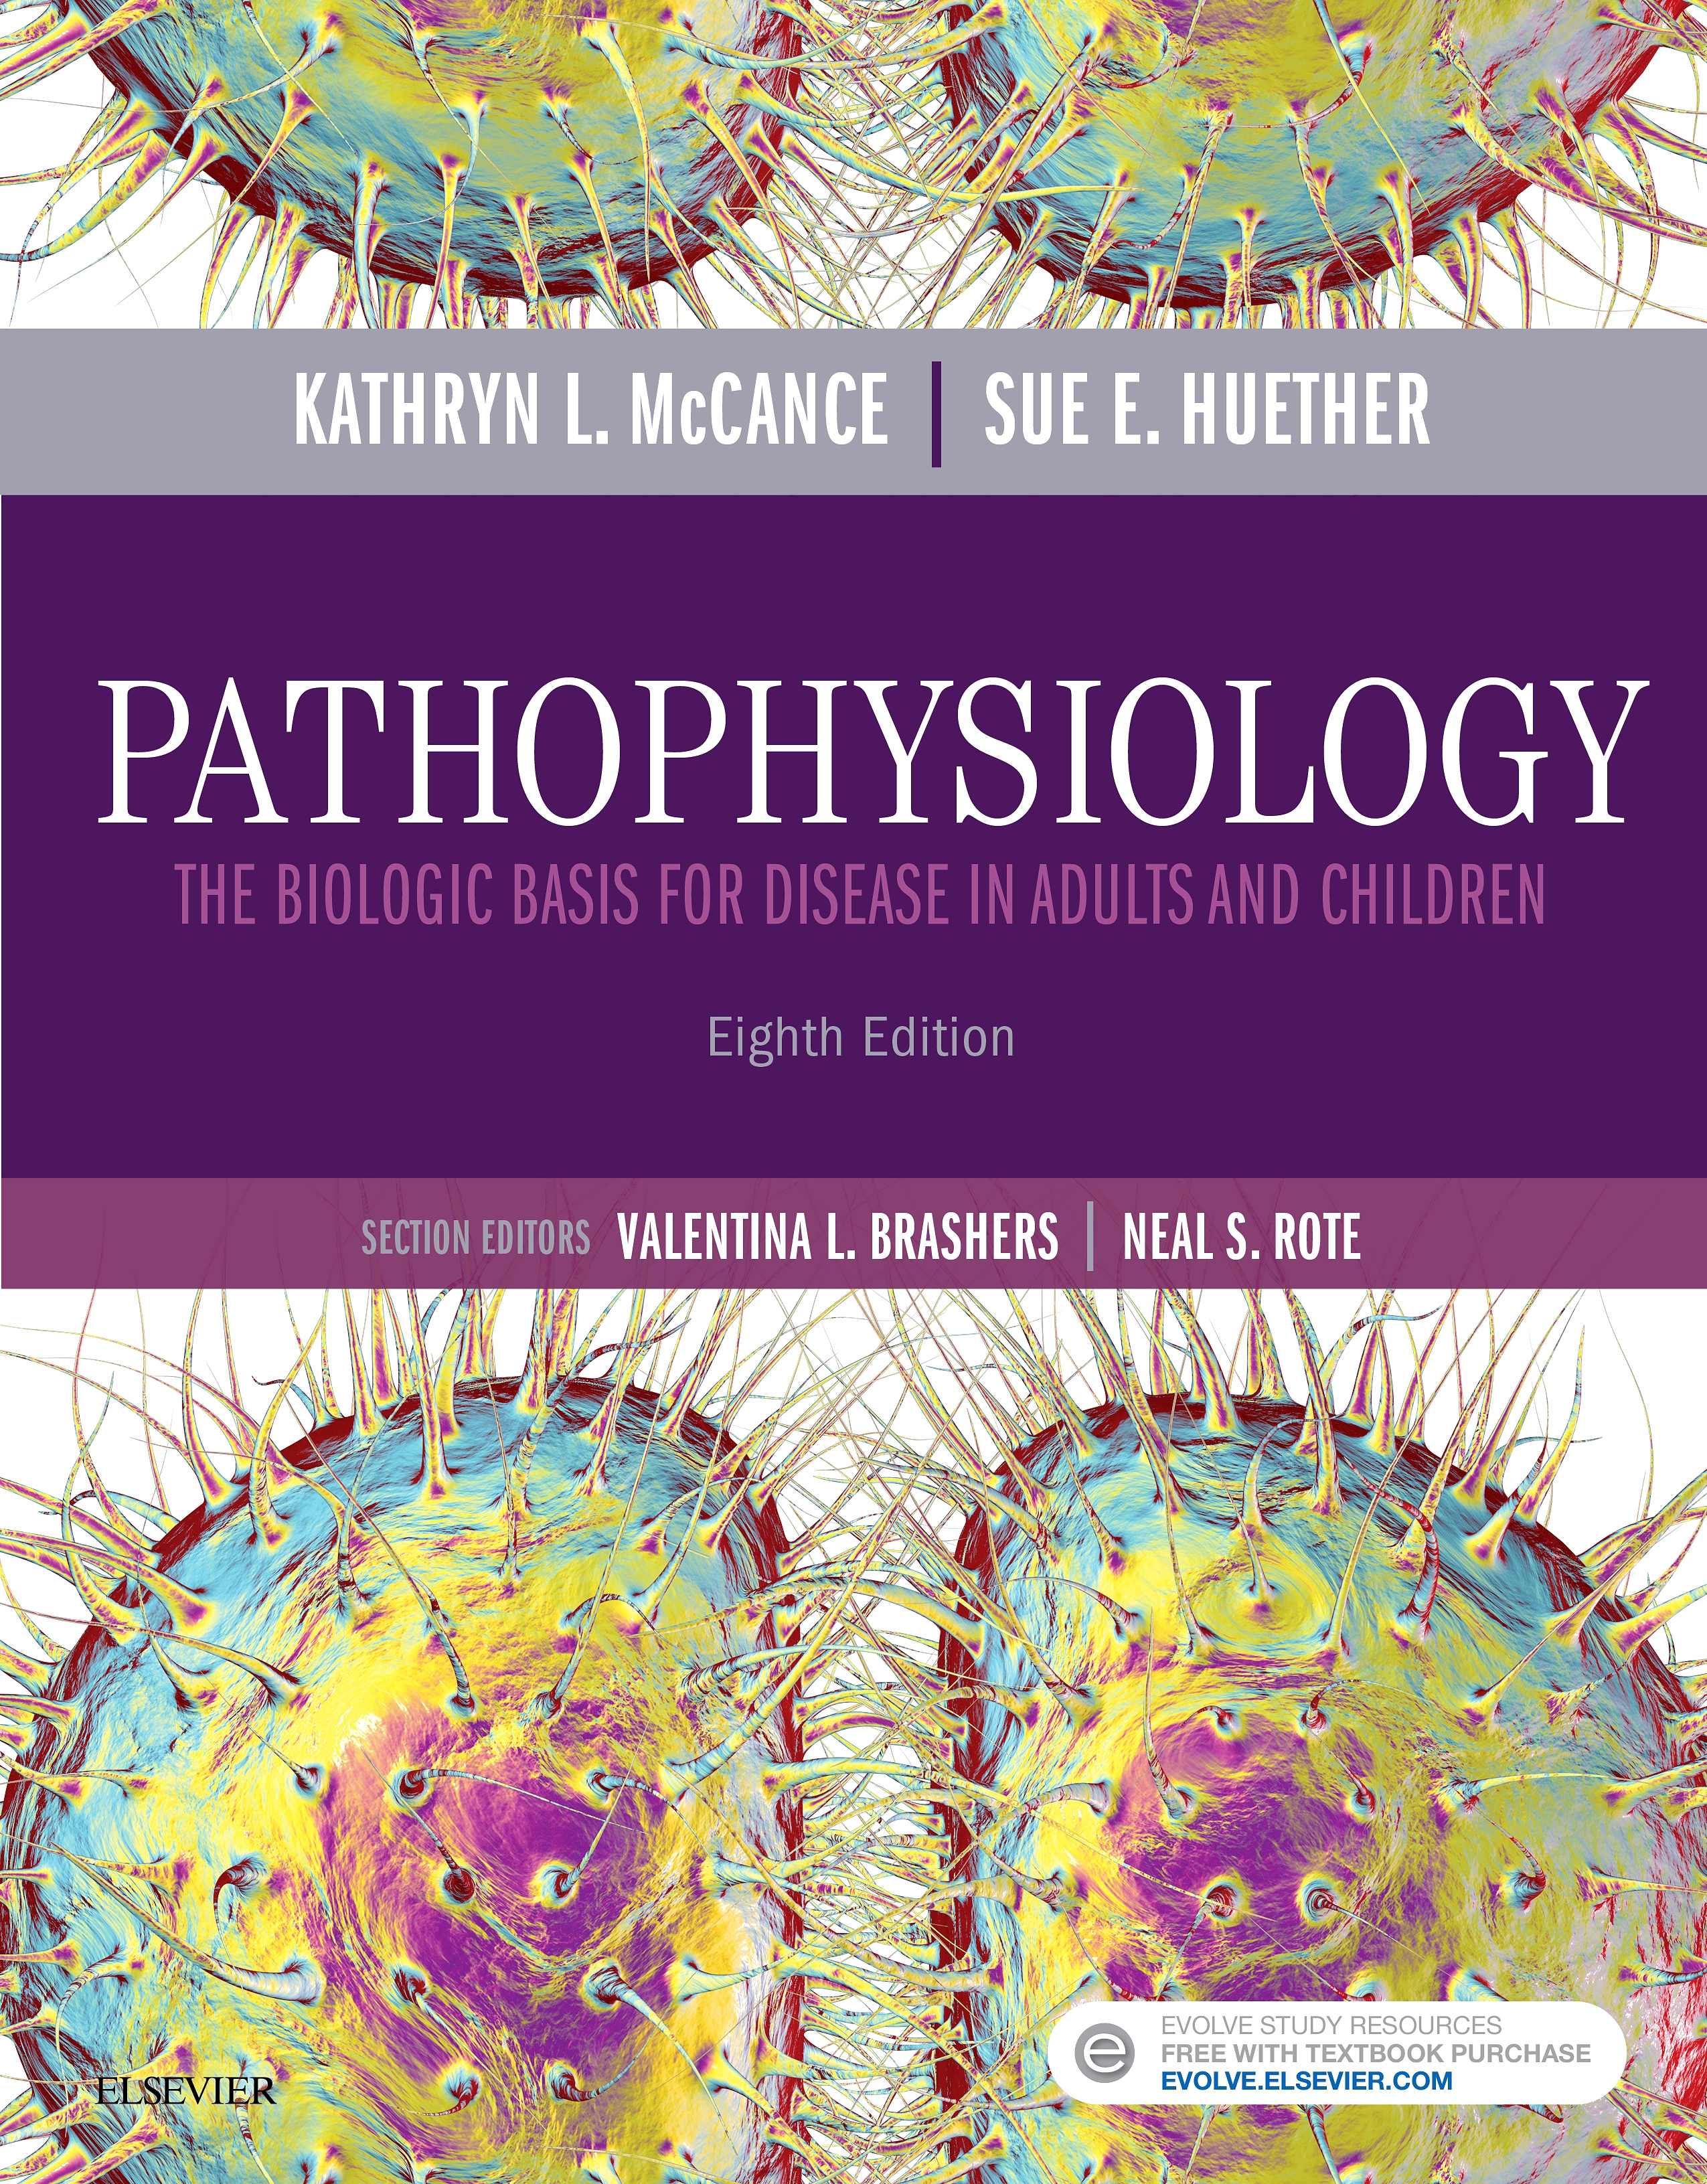 Evolve Resources for Pathophysiology, 8th Edition